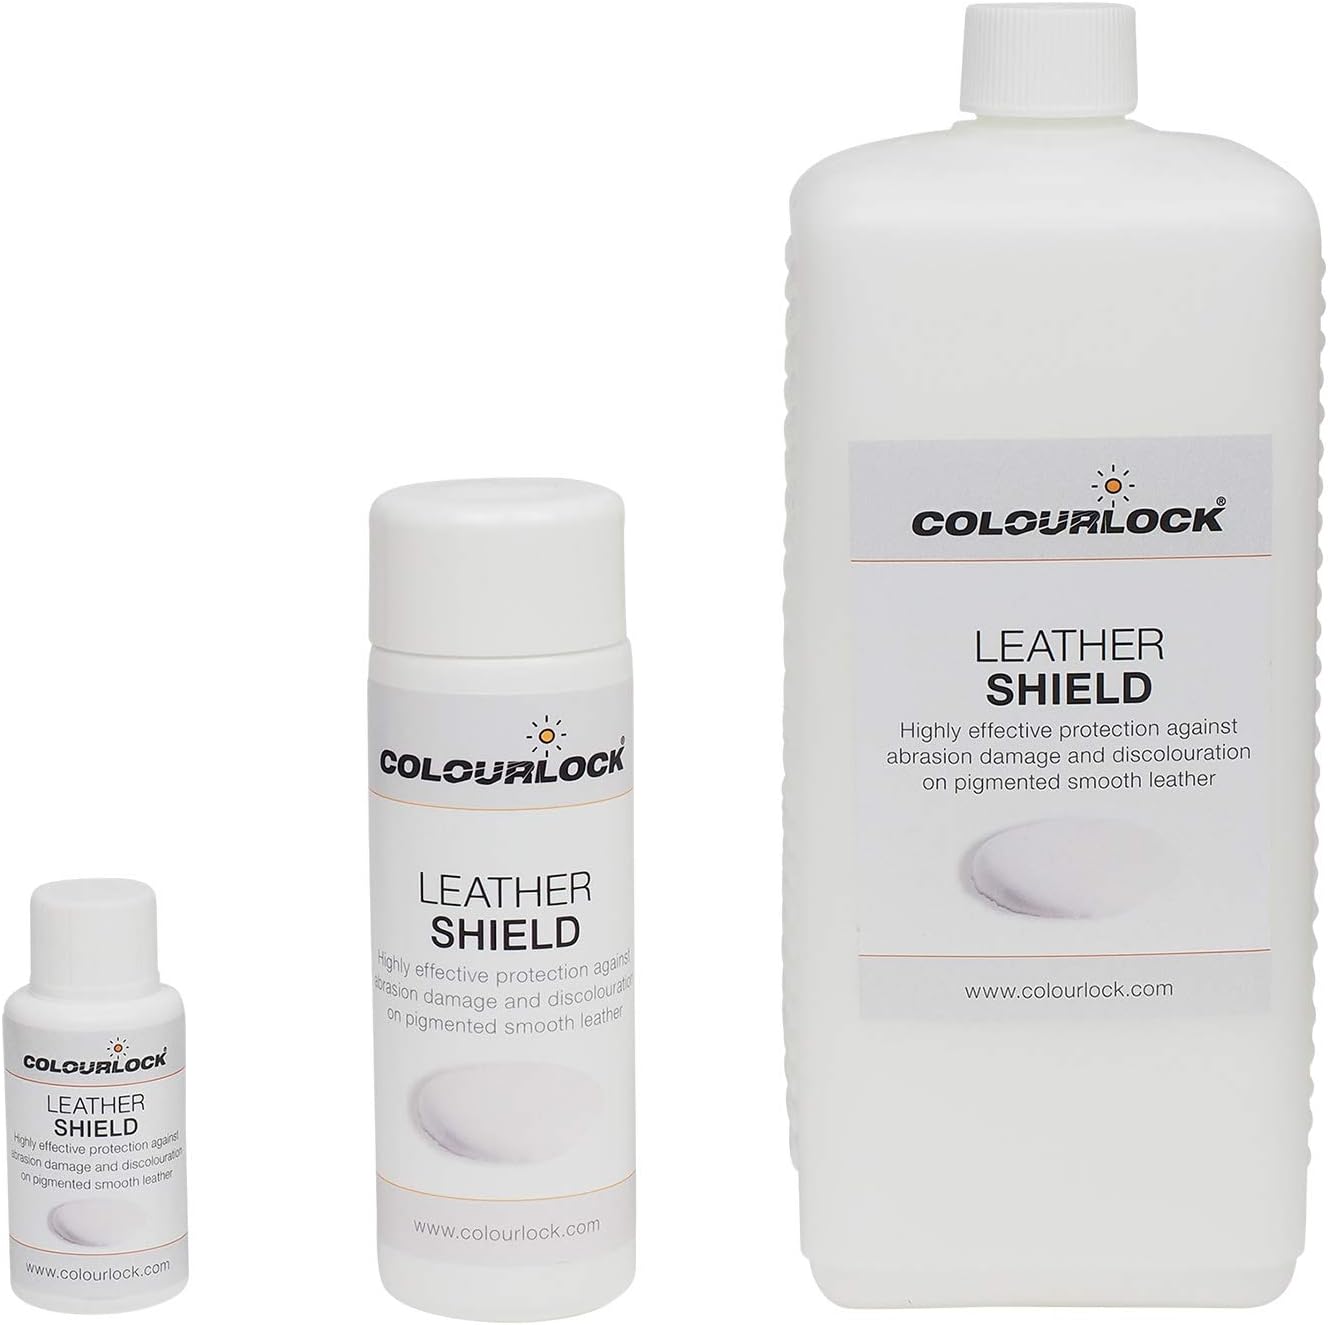 COLOURLOCK Leather Shield for New Leathers & Protection from Ink & dye transfers on Leather (1 Litre)